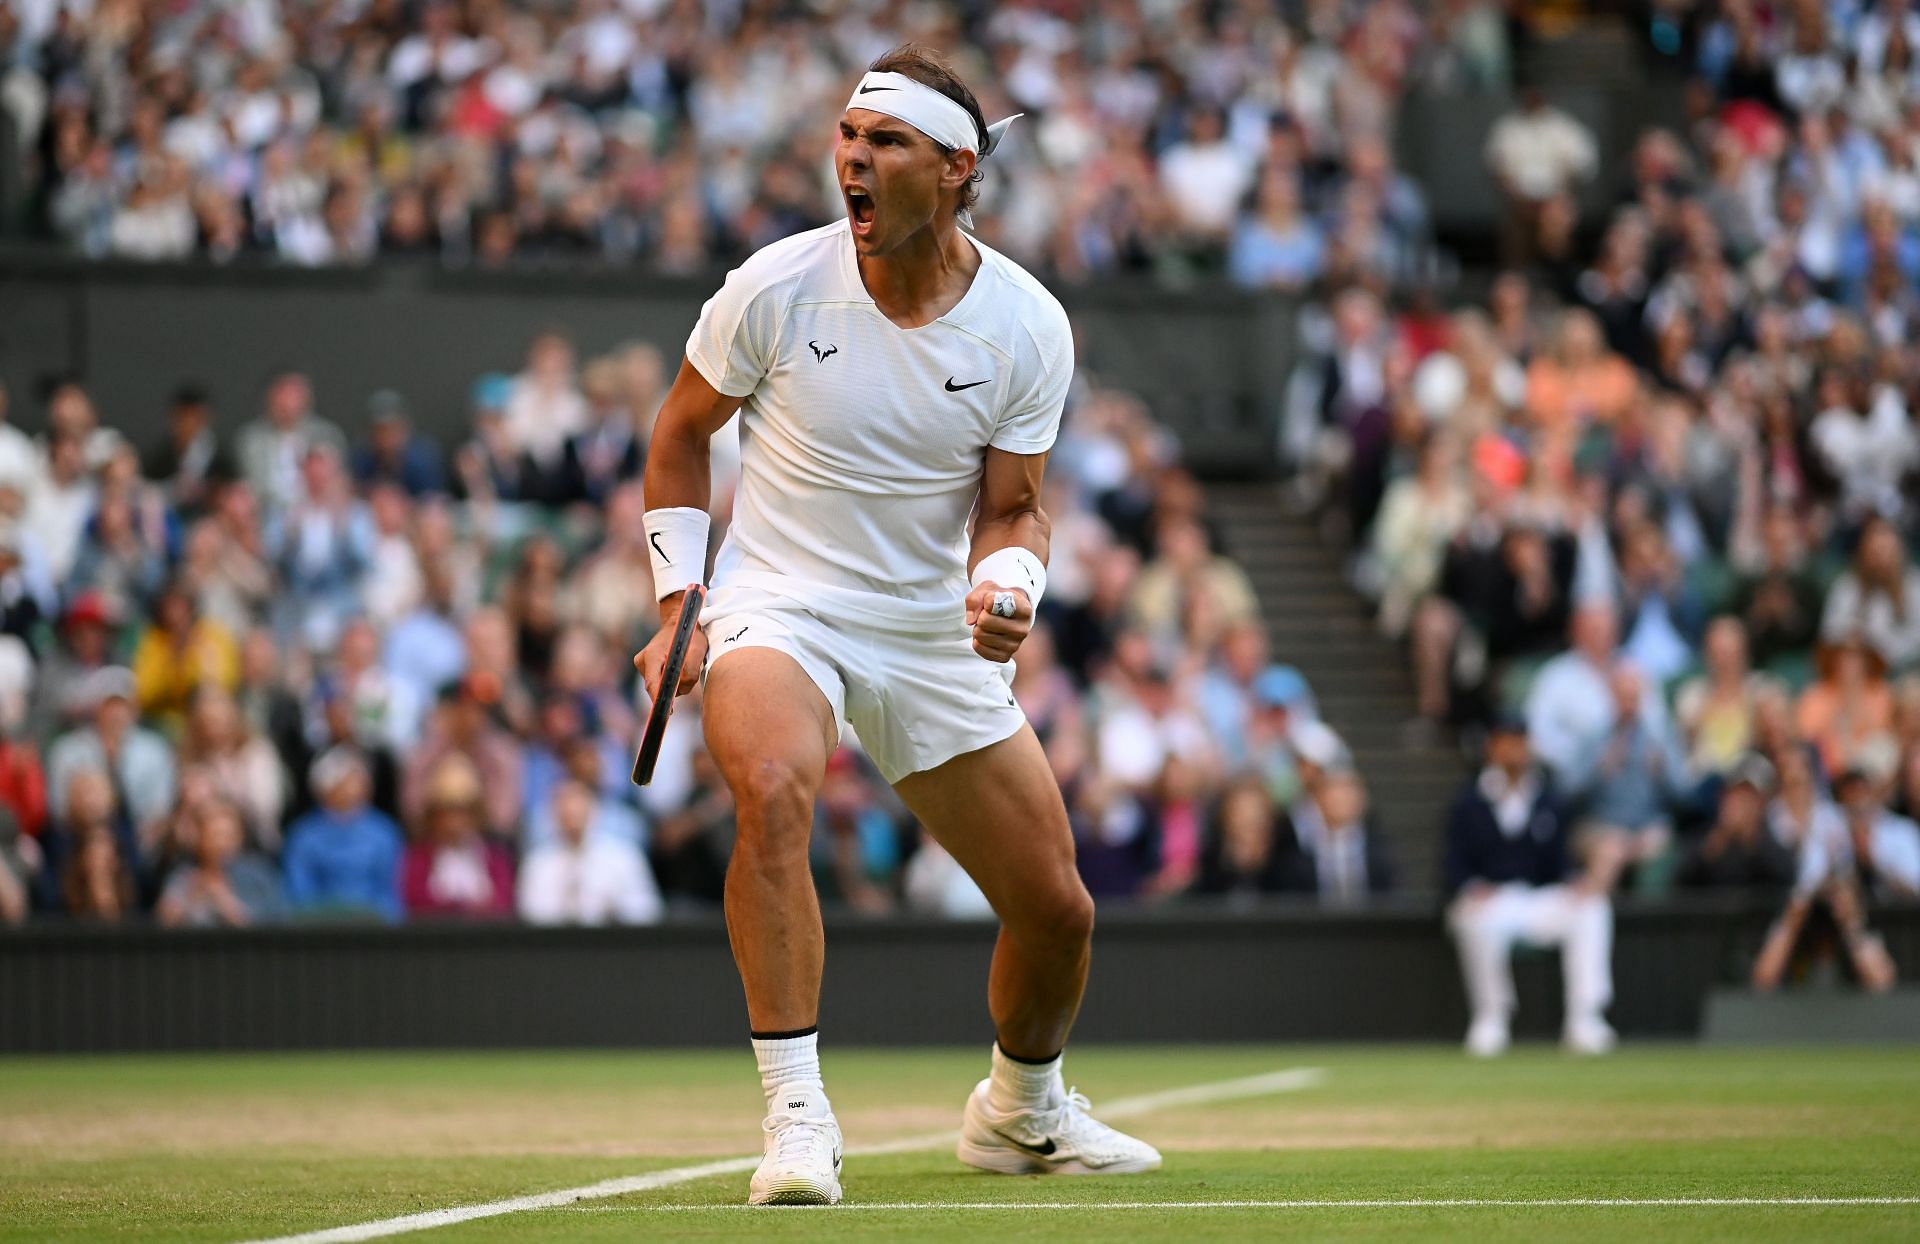 Rafael Nadal will play his quarterfinal on Day 10 of Wimbledon